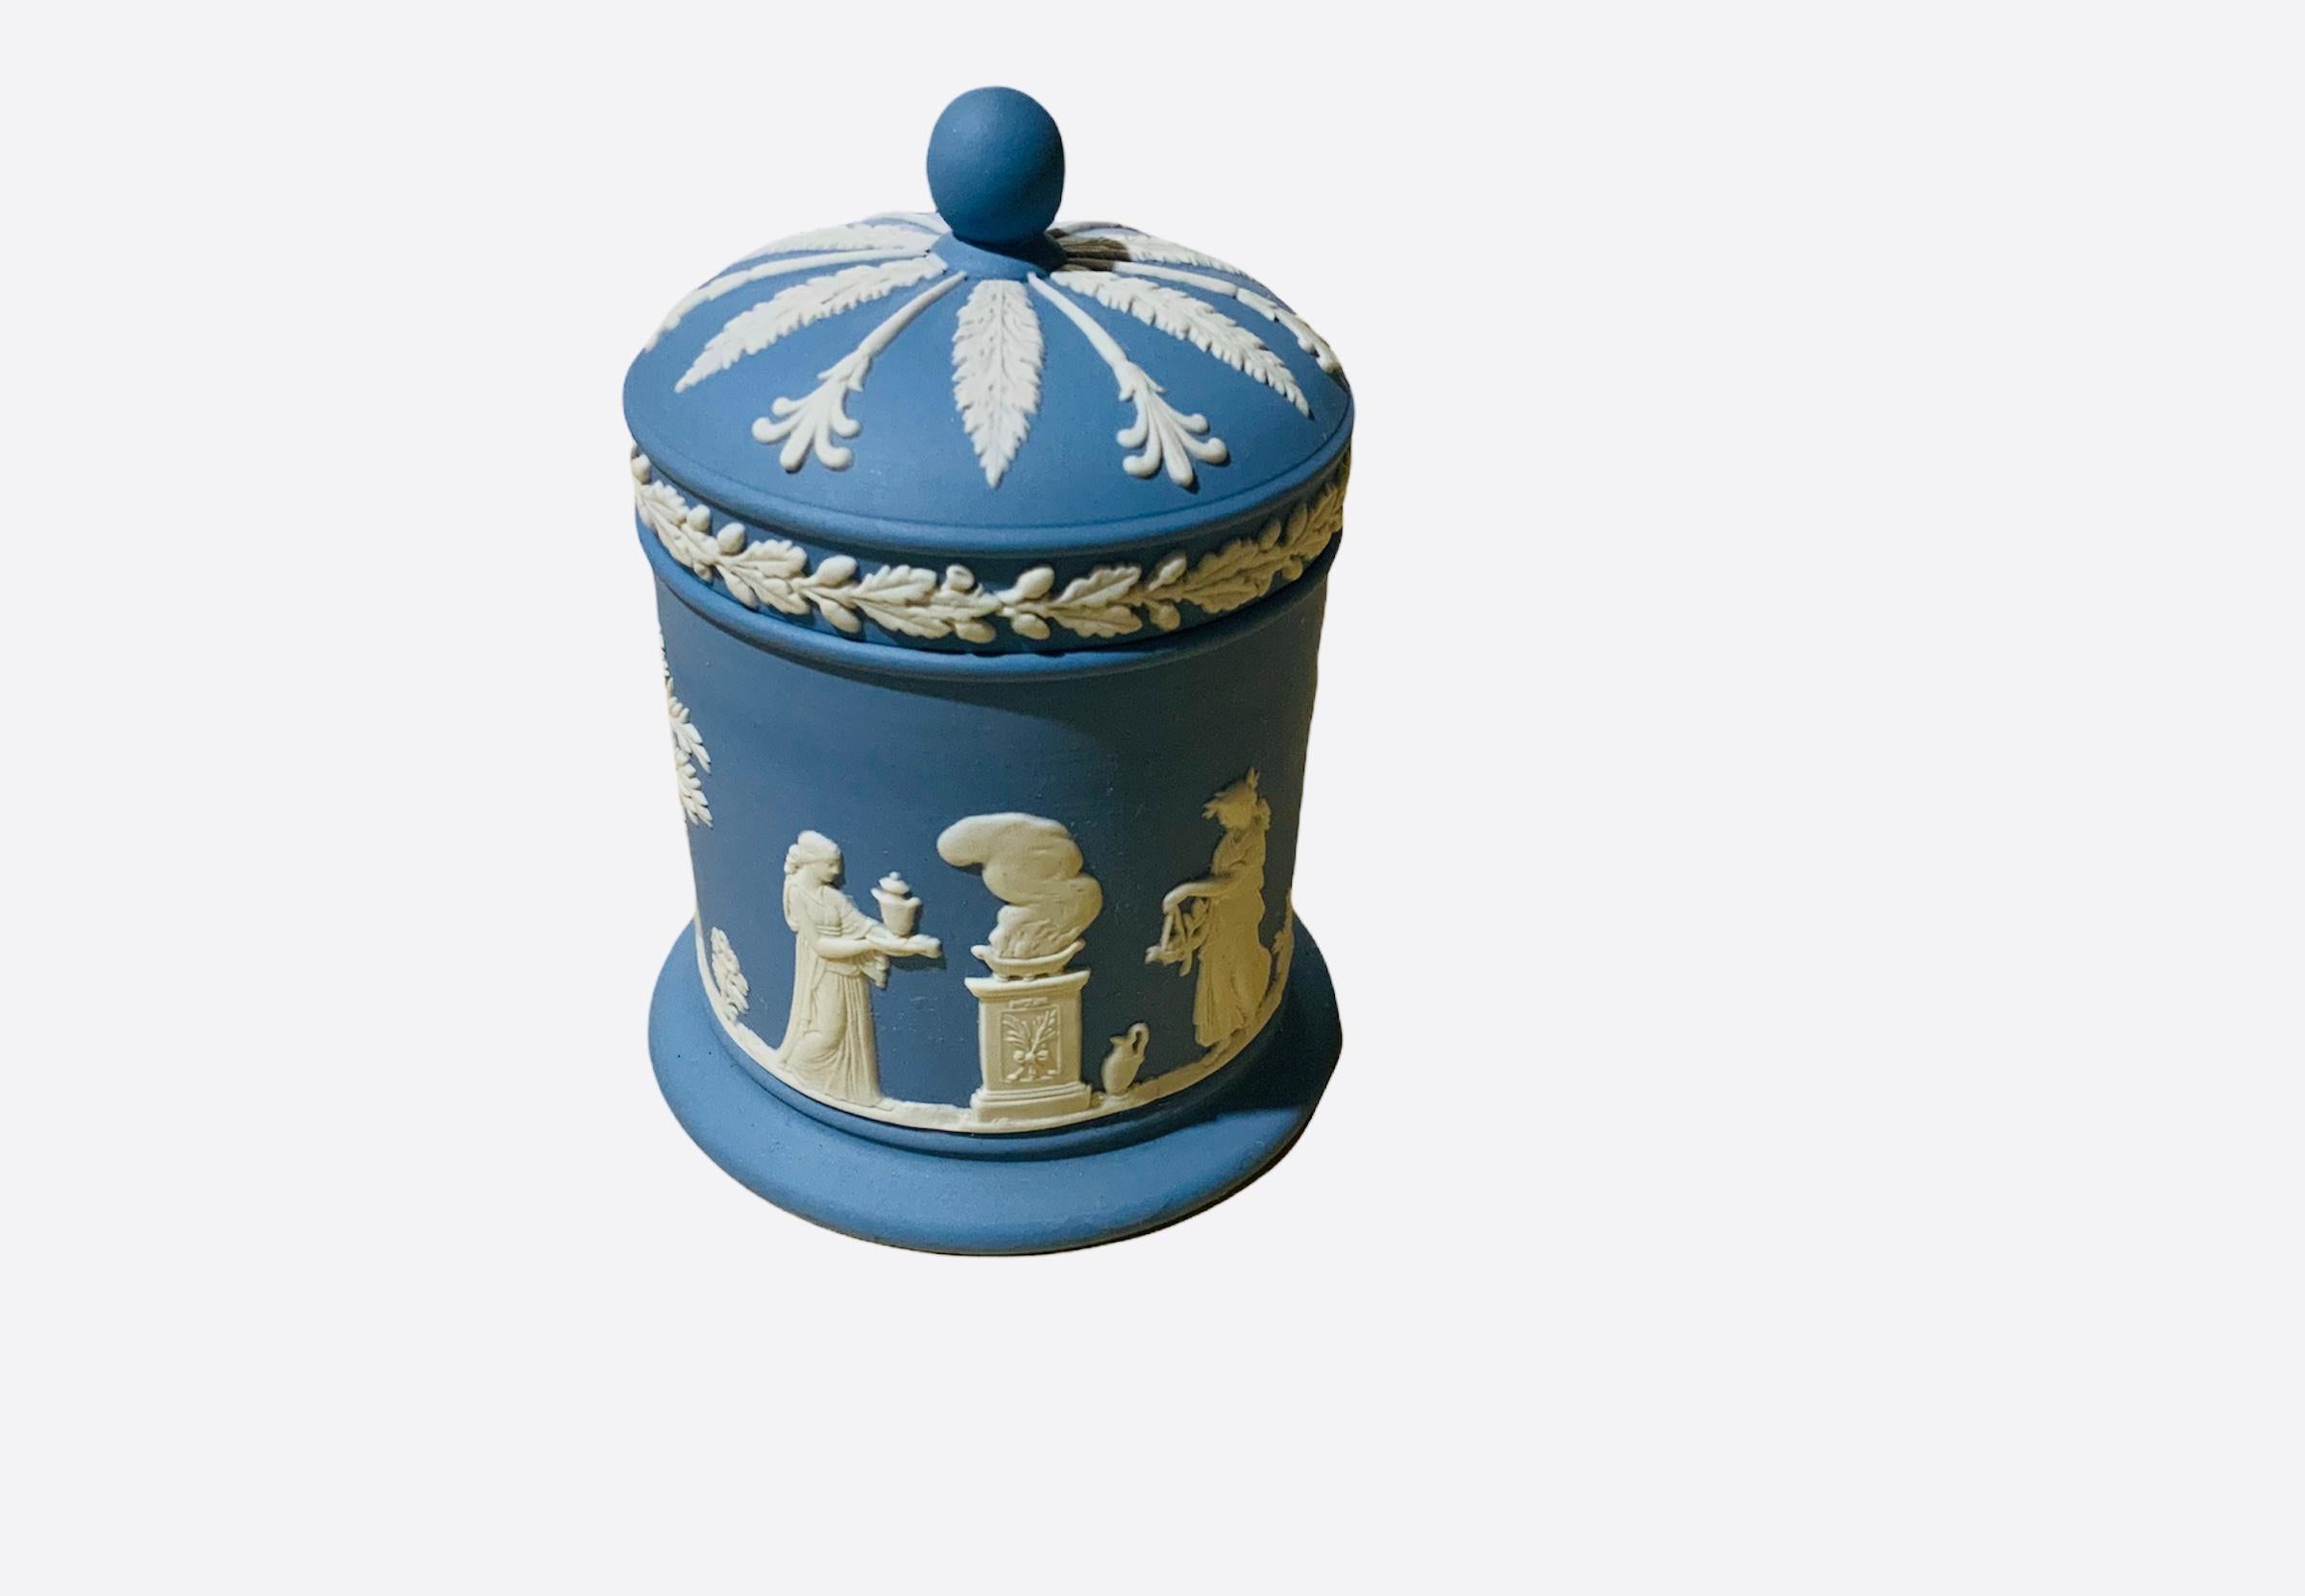 This is a Wedgewood Canister/Tobacco cylindrical lidded Jar with a blue background. It depicts a continuos Greek/Roman white relief scenes. In one scene, it is represented the goddess Artemis and Aphrodite between a winged cherub in a pedestal. The